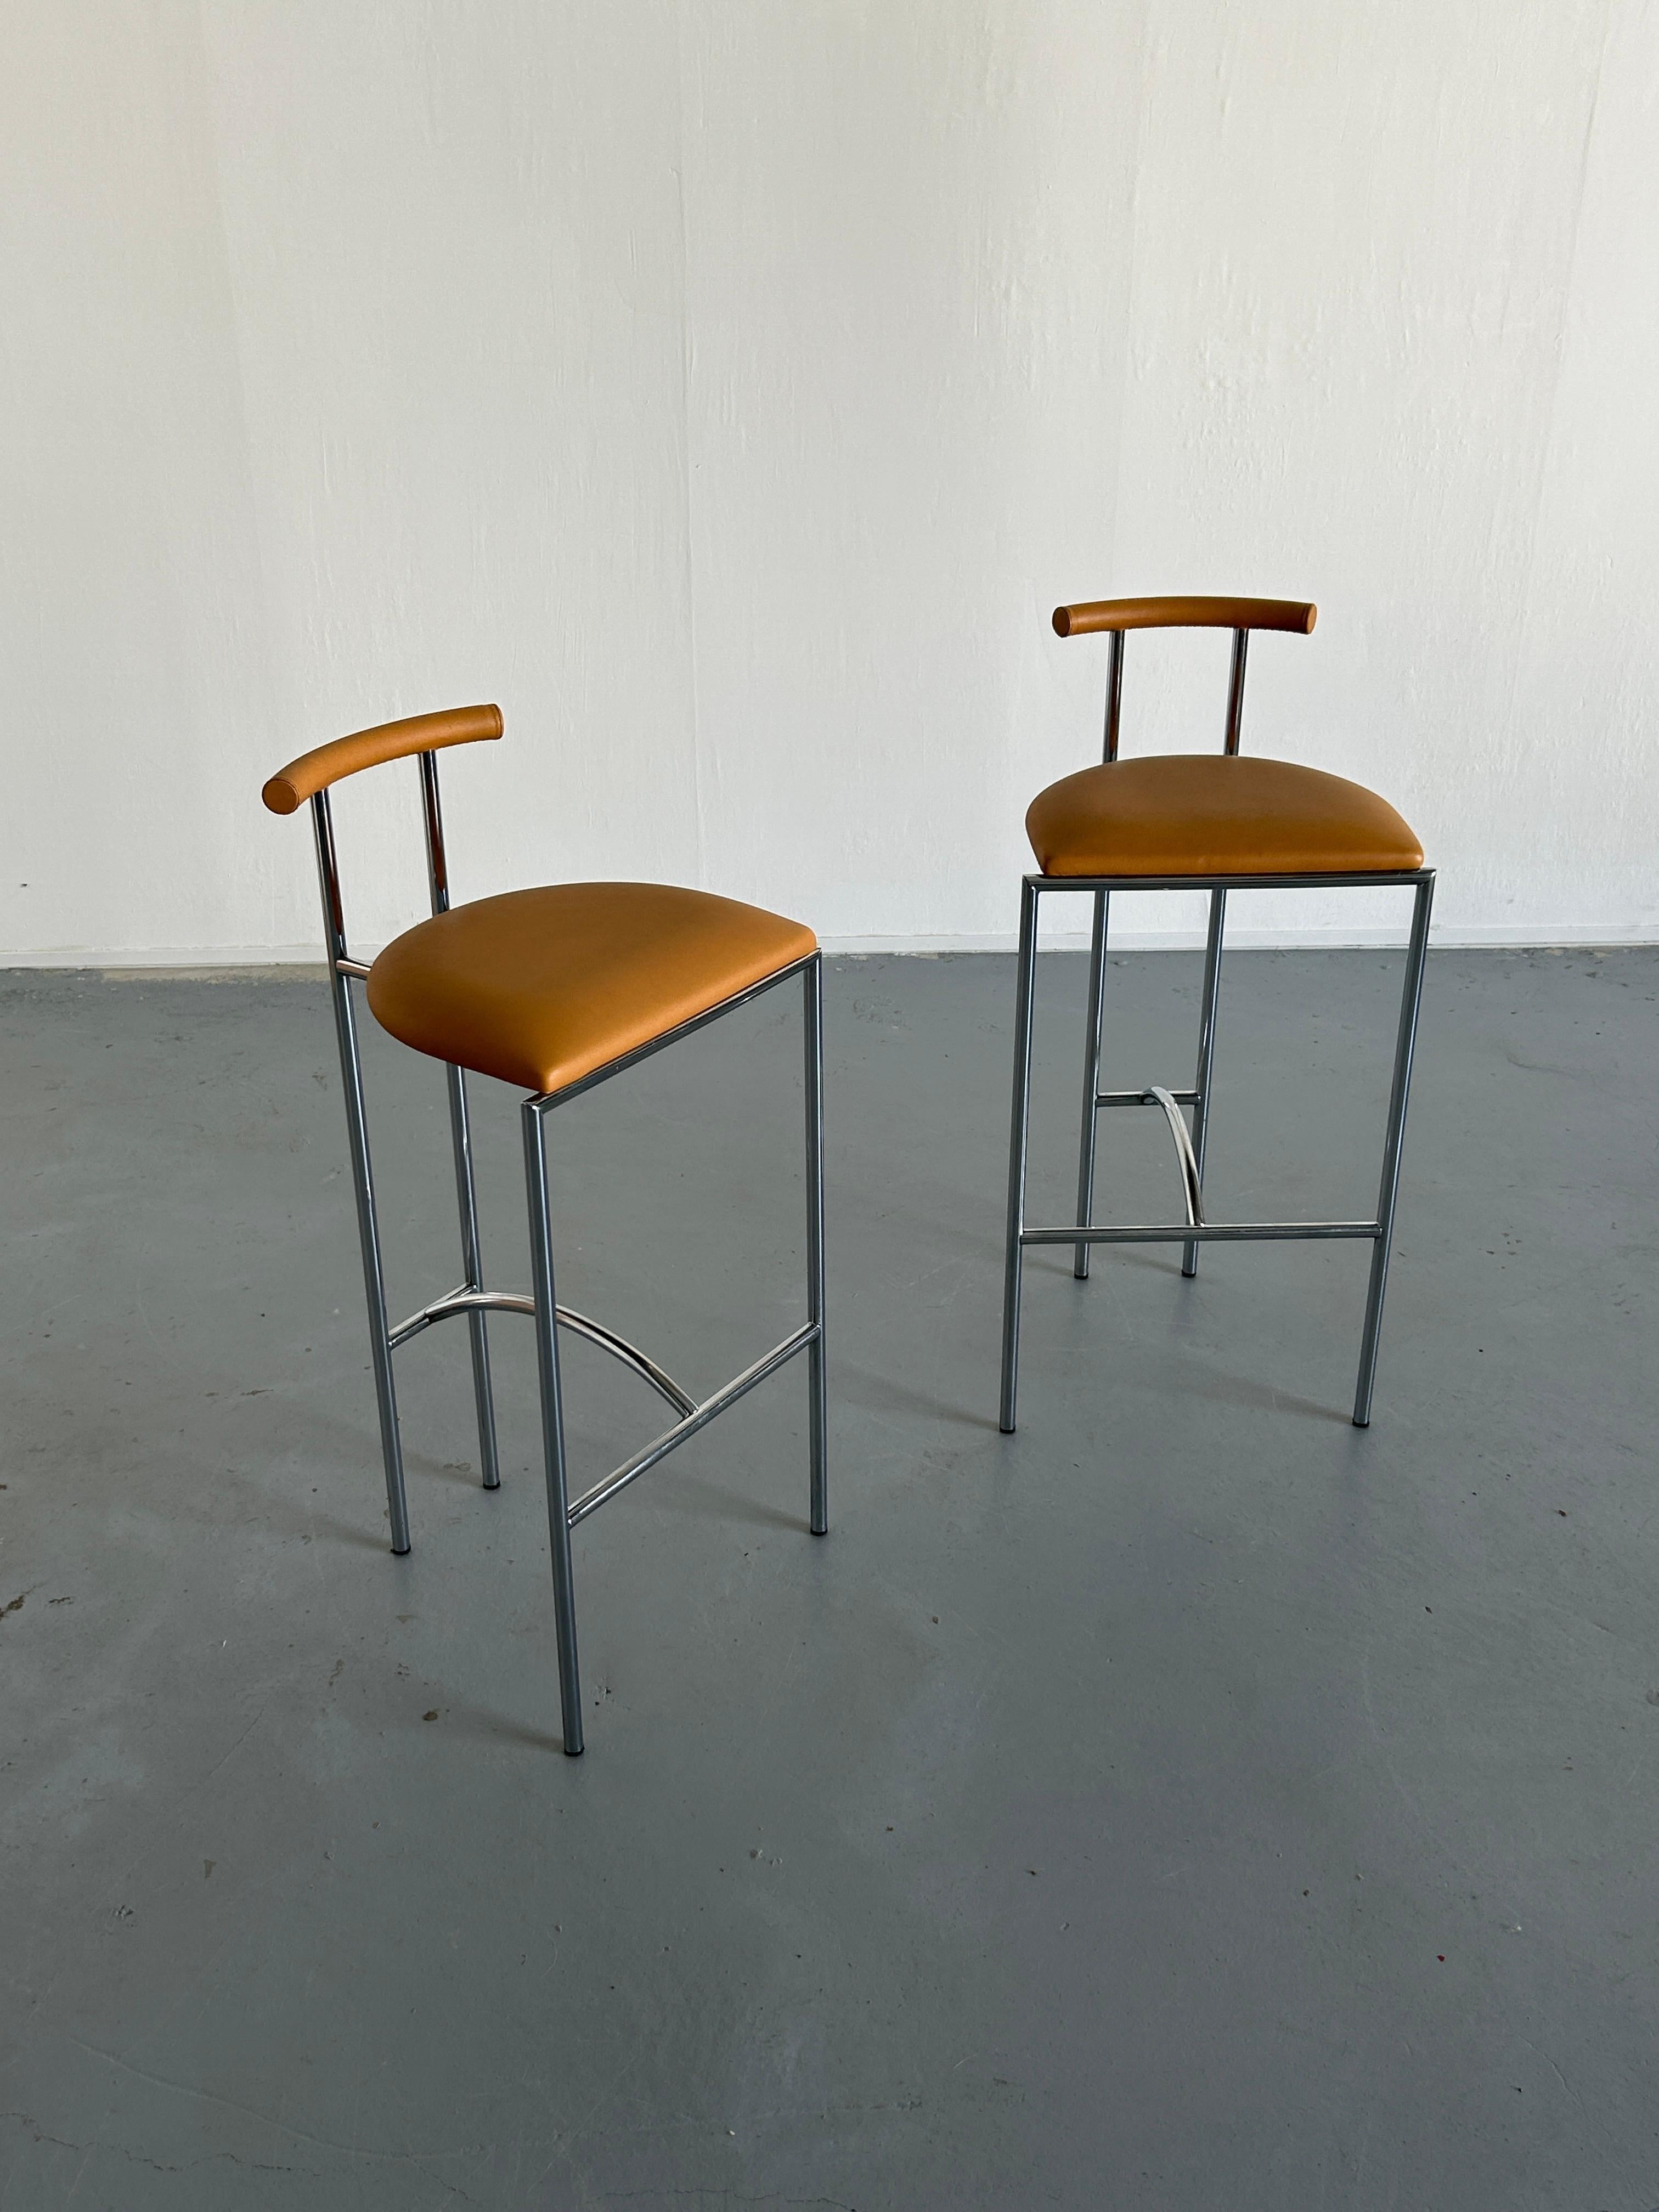 A pair of 'Tokyo' bar stools by Rodney Kinsman for Bieffeplast, Italy.
Iconic postmodern design.
Exceptionally rare, chrome and brown faux leather edition.

Italian production, c. 1985-1989

No rust or damage.
In excellent vintage condition